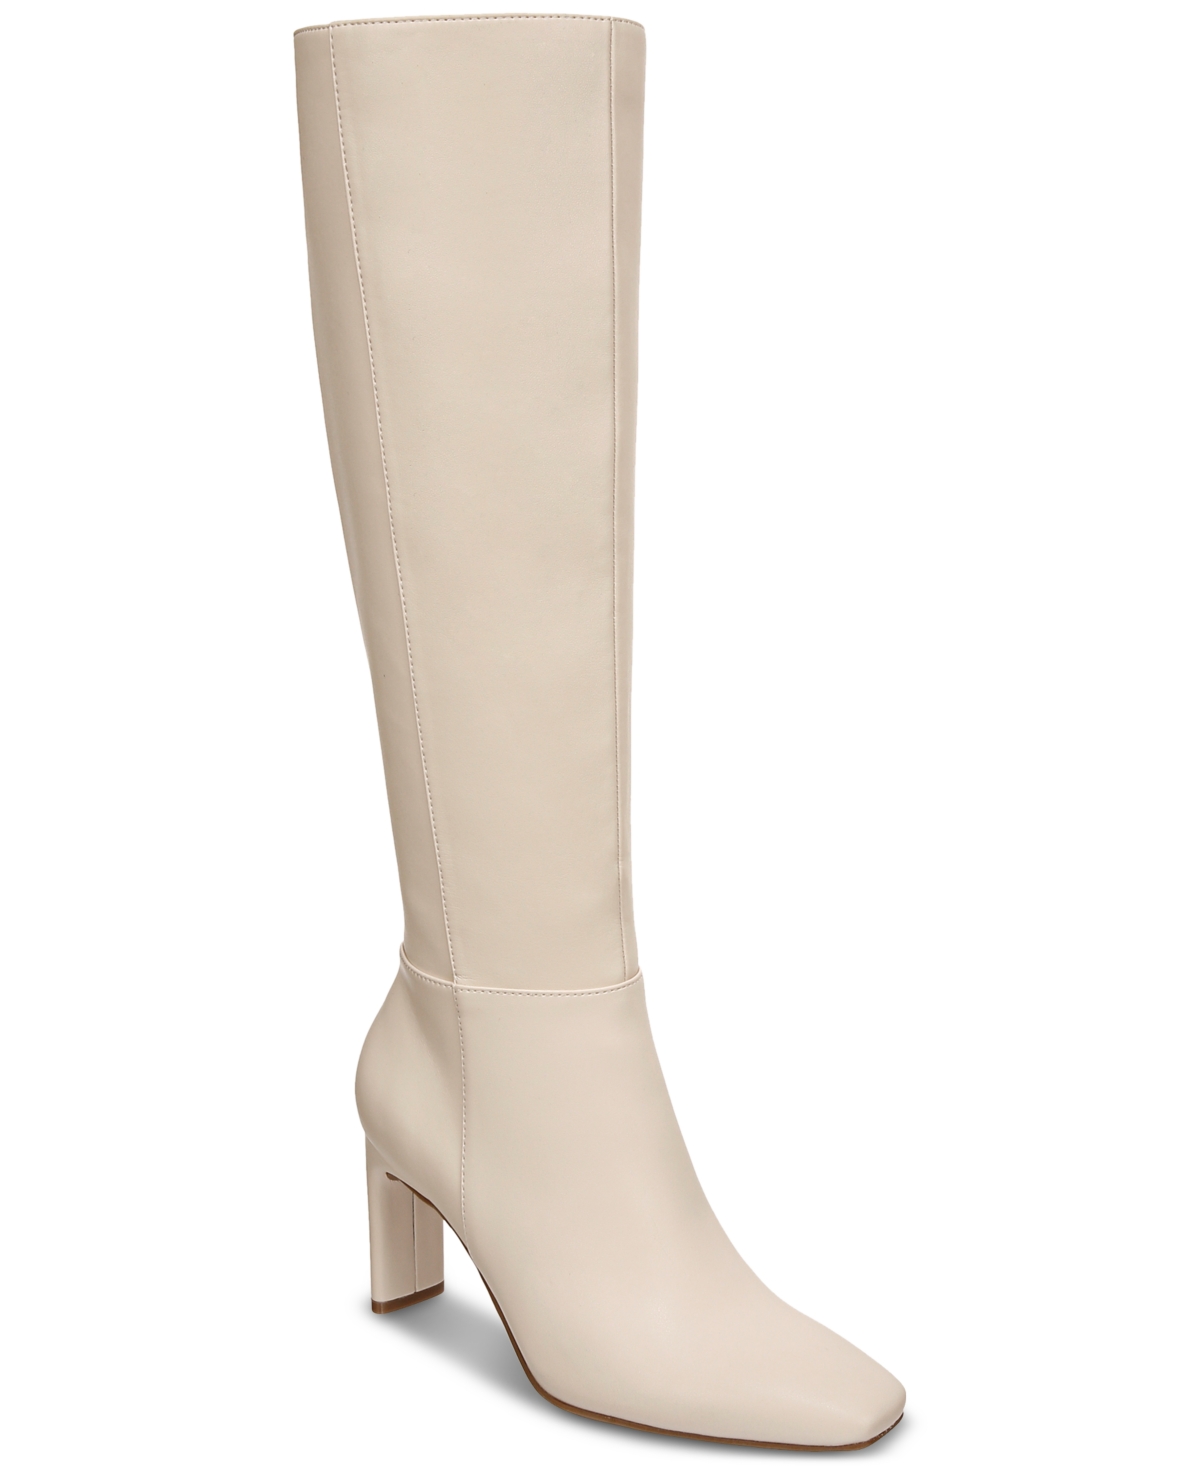 Women's Tristanne Knee High Boots, Created for Macy's - Bone Smooth